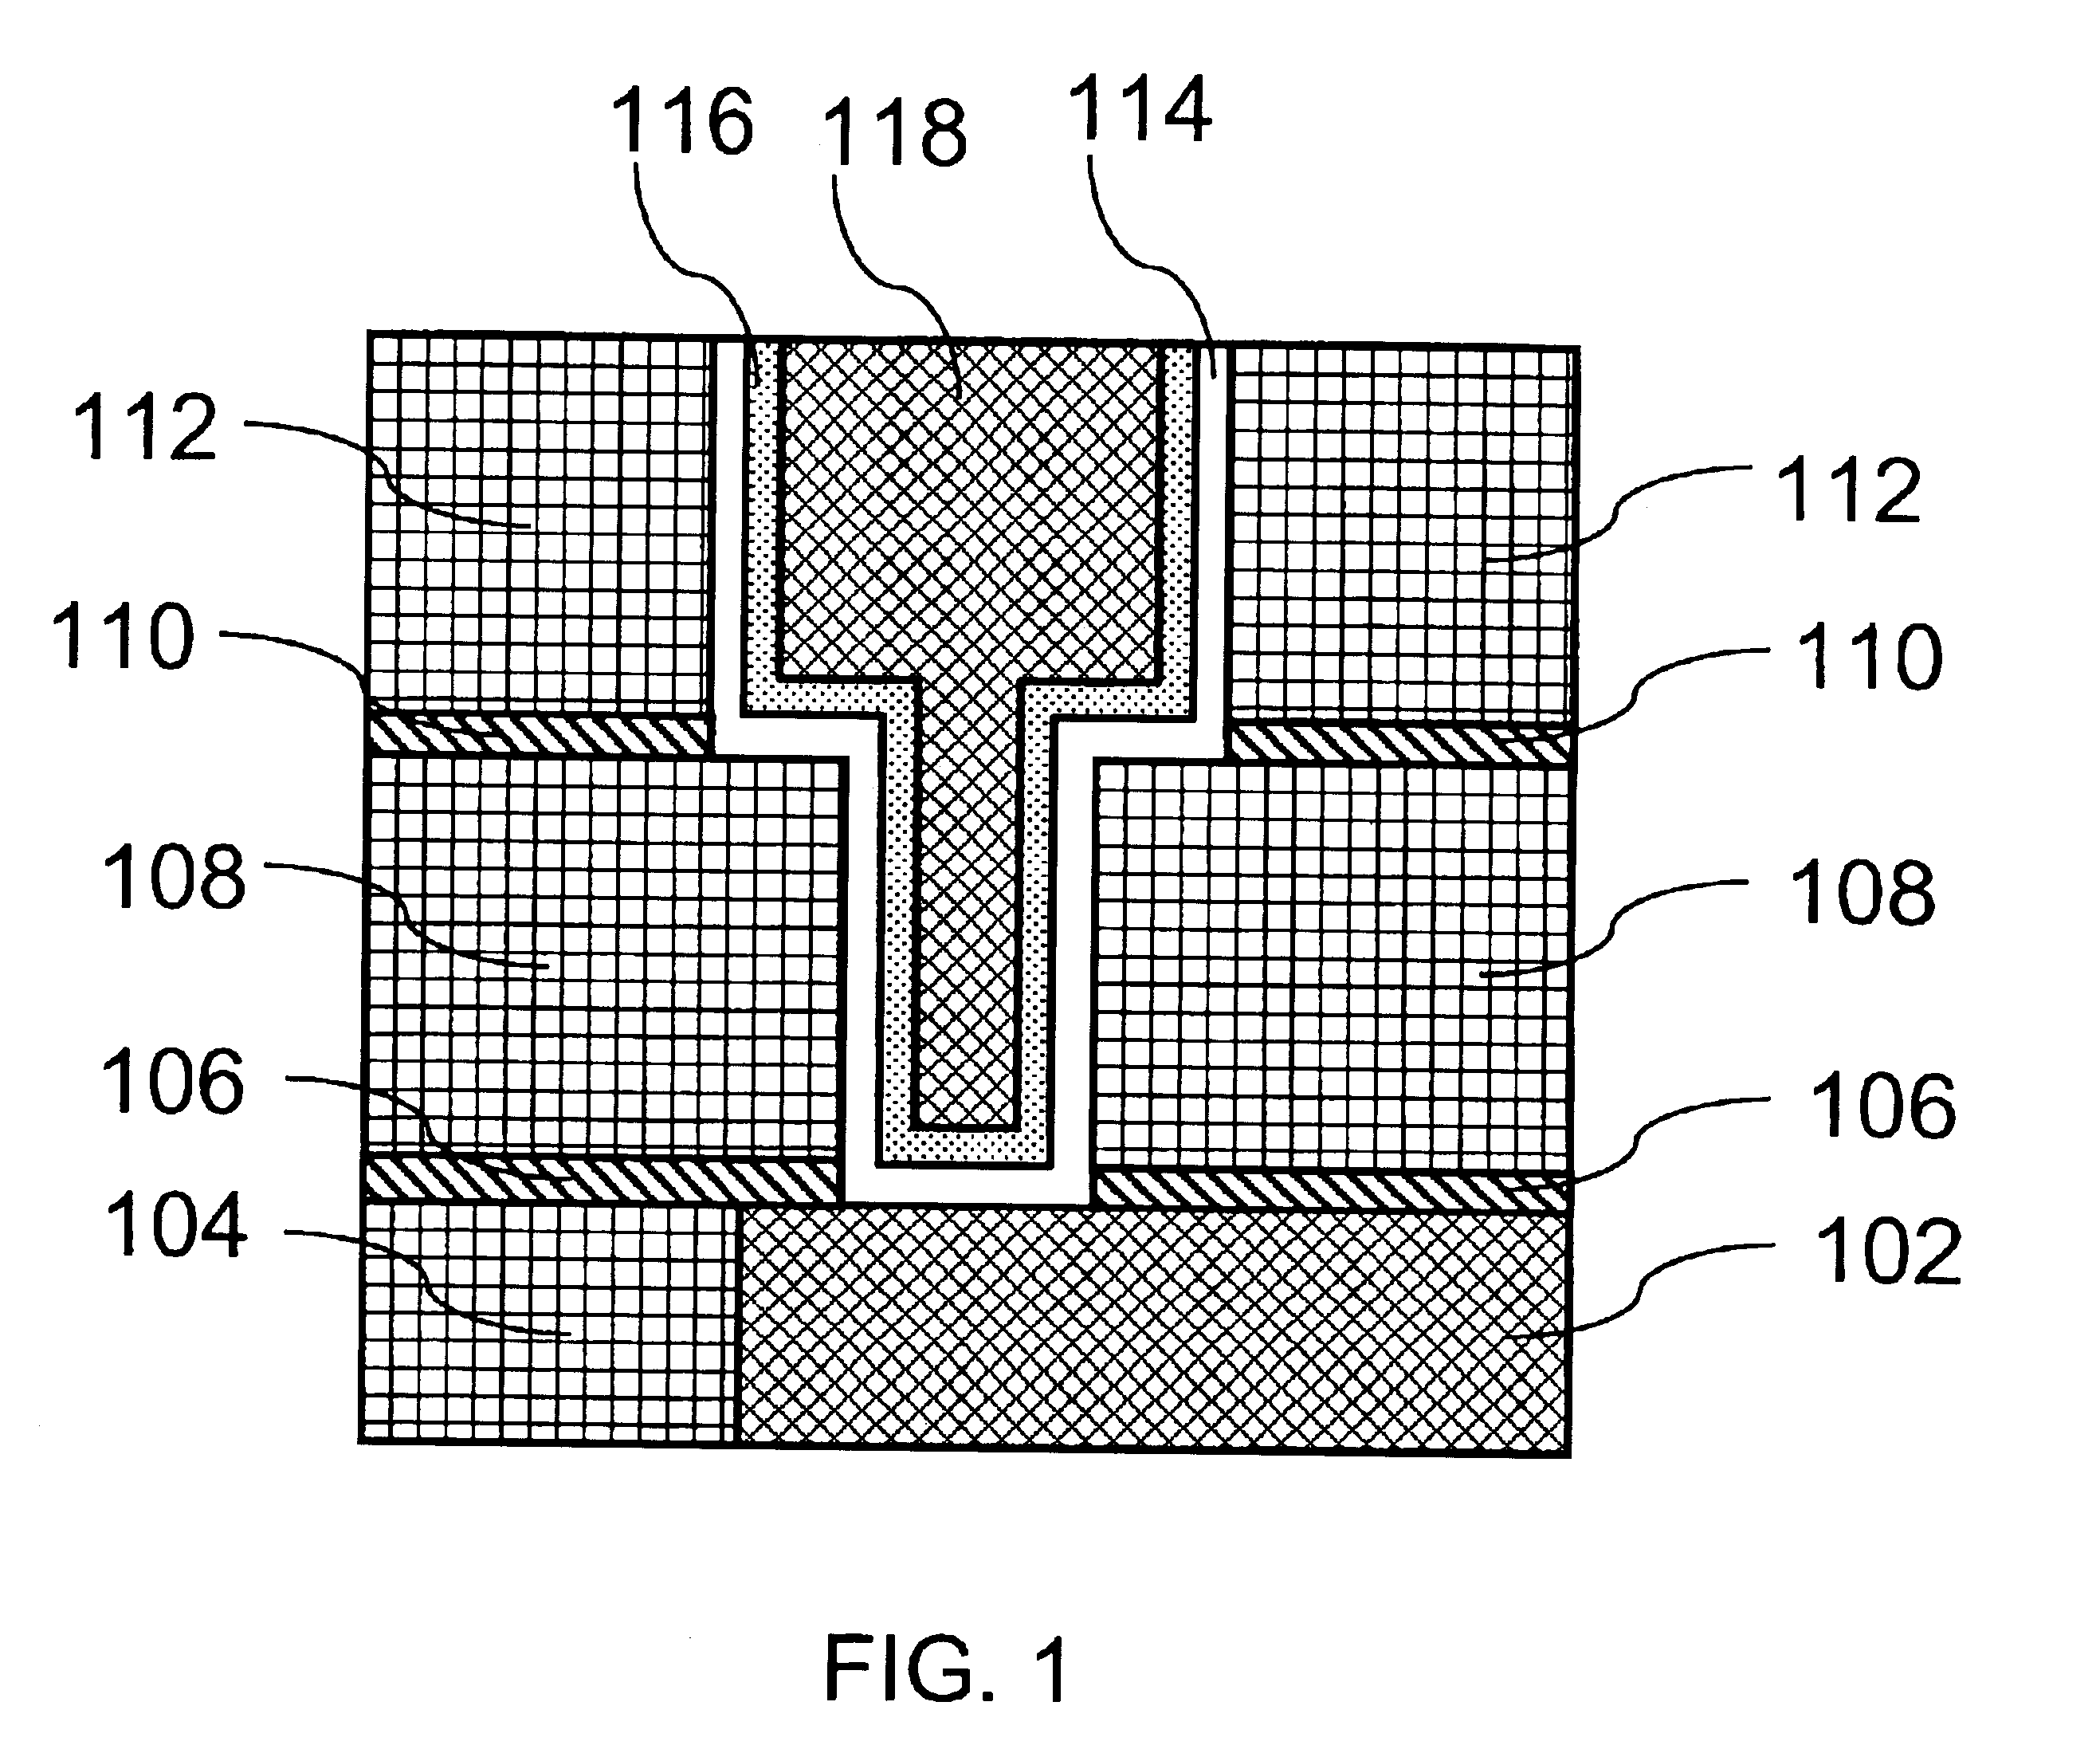 Atomic layer deposition methods for forming a multi-layer adhesion-barrier layer for integrated circuits